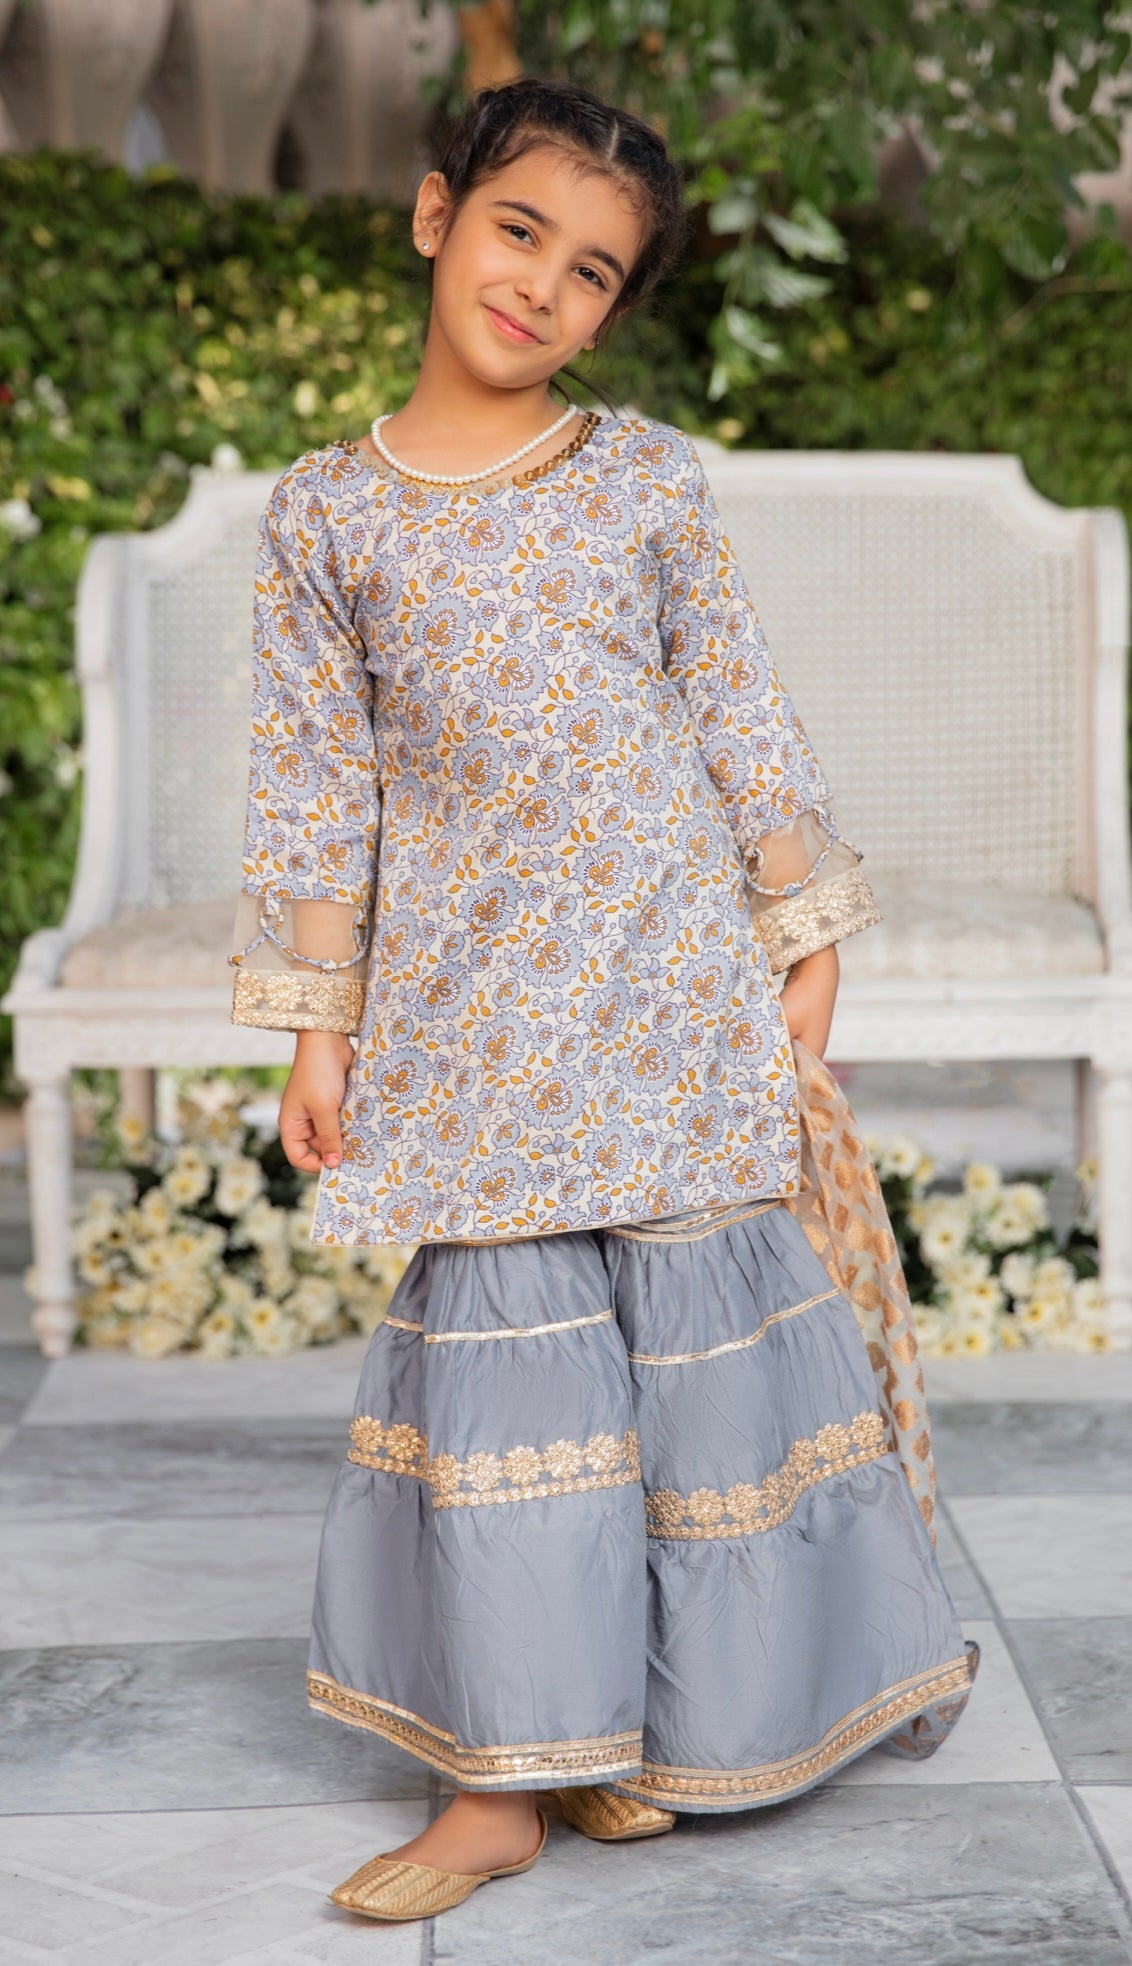 SIMRANS Ivana mother and daughter luxury lawn gharara suit in Grey SIL303